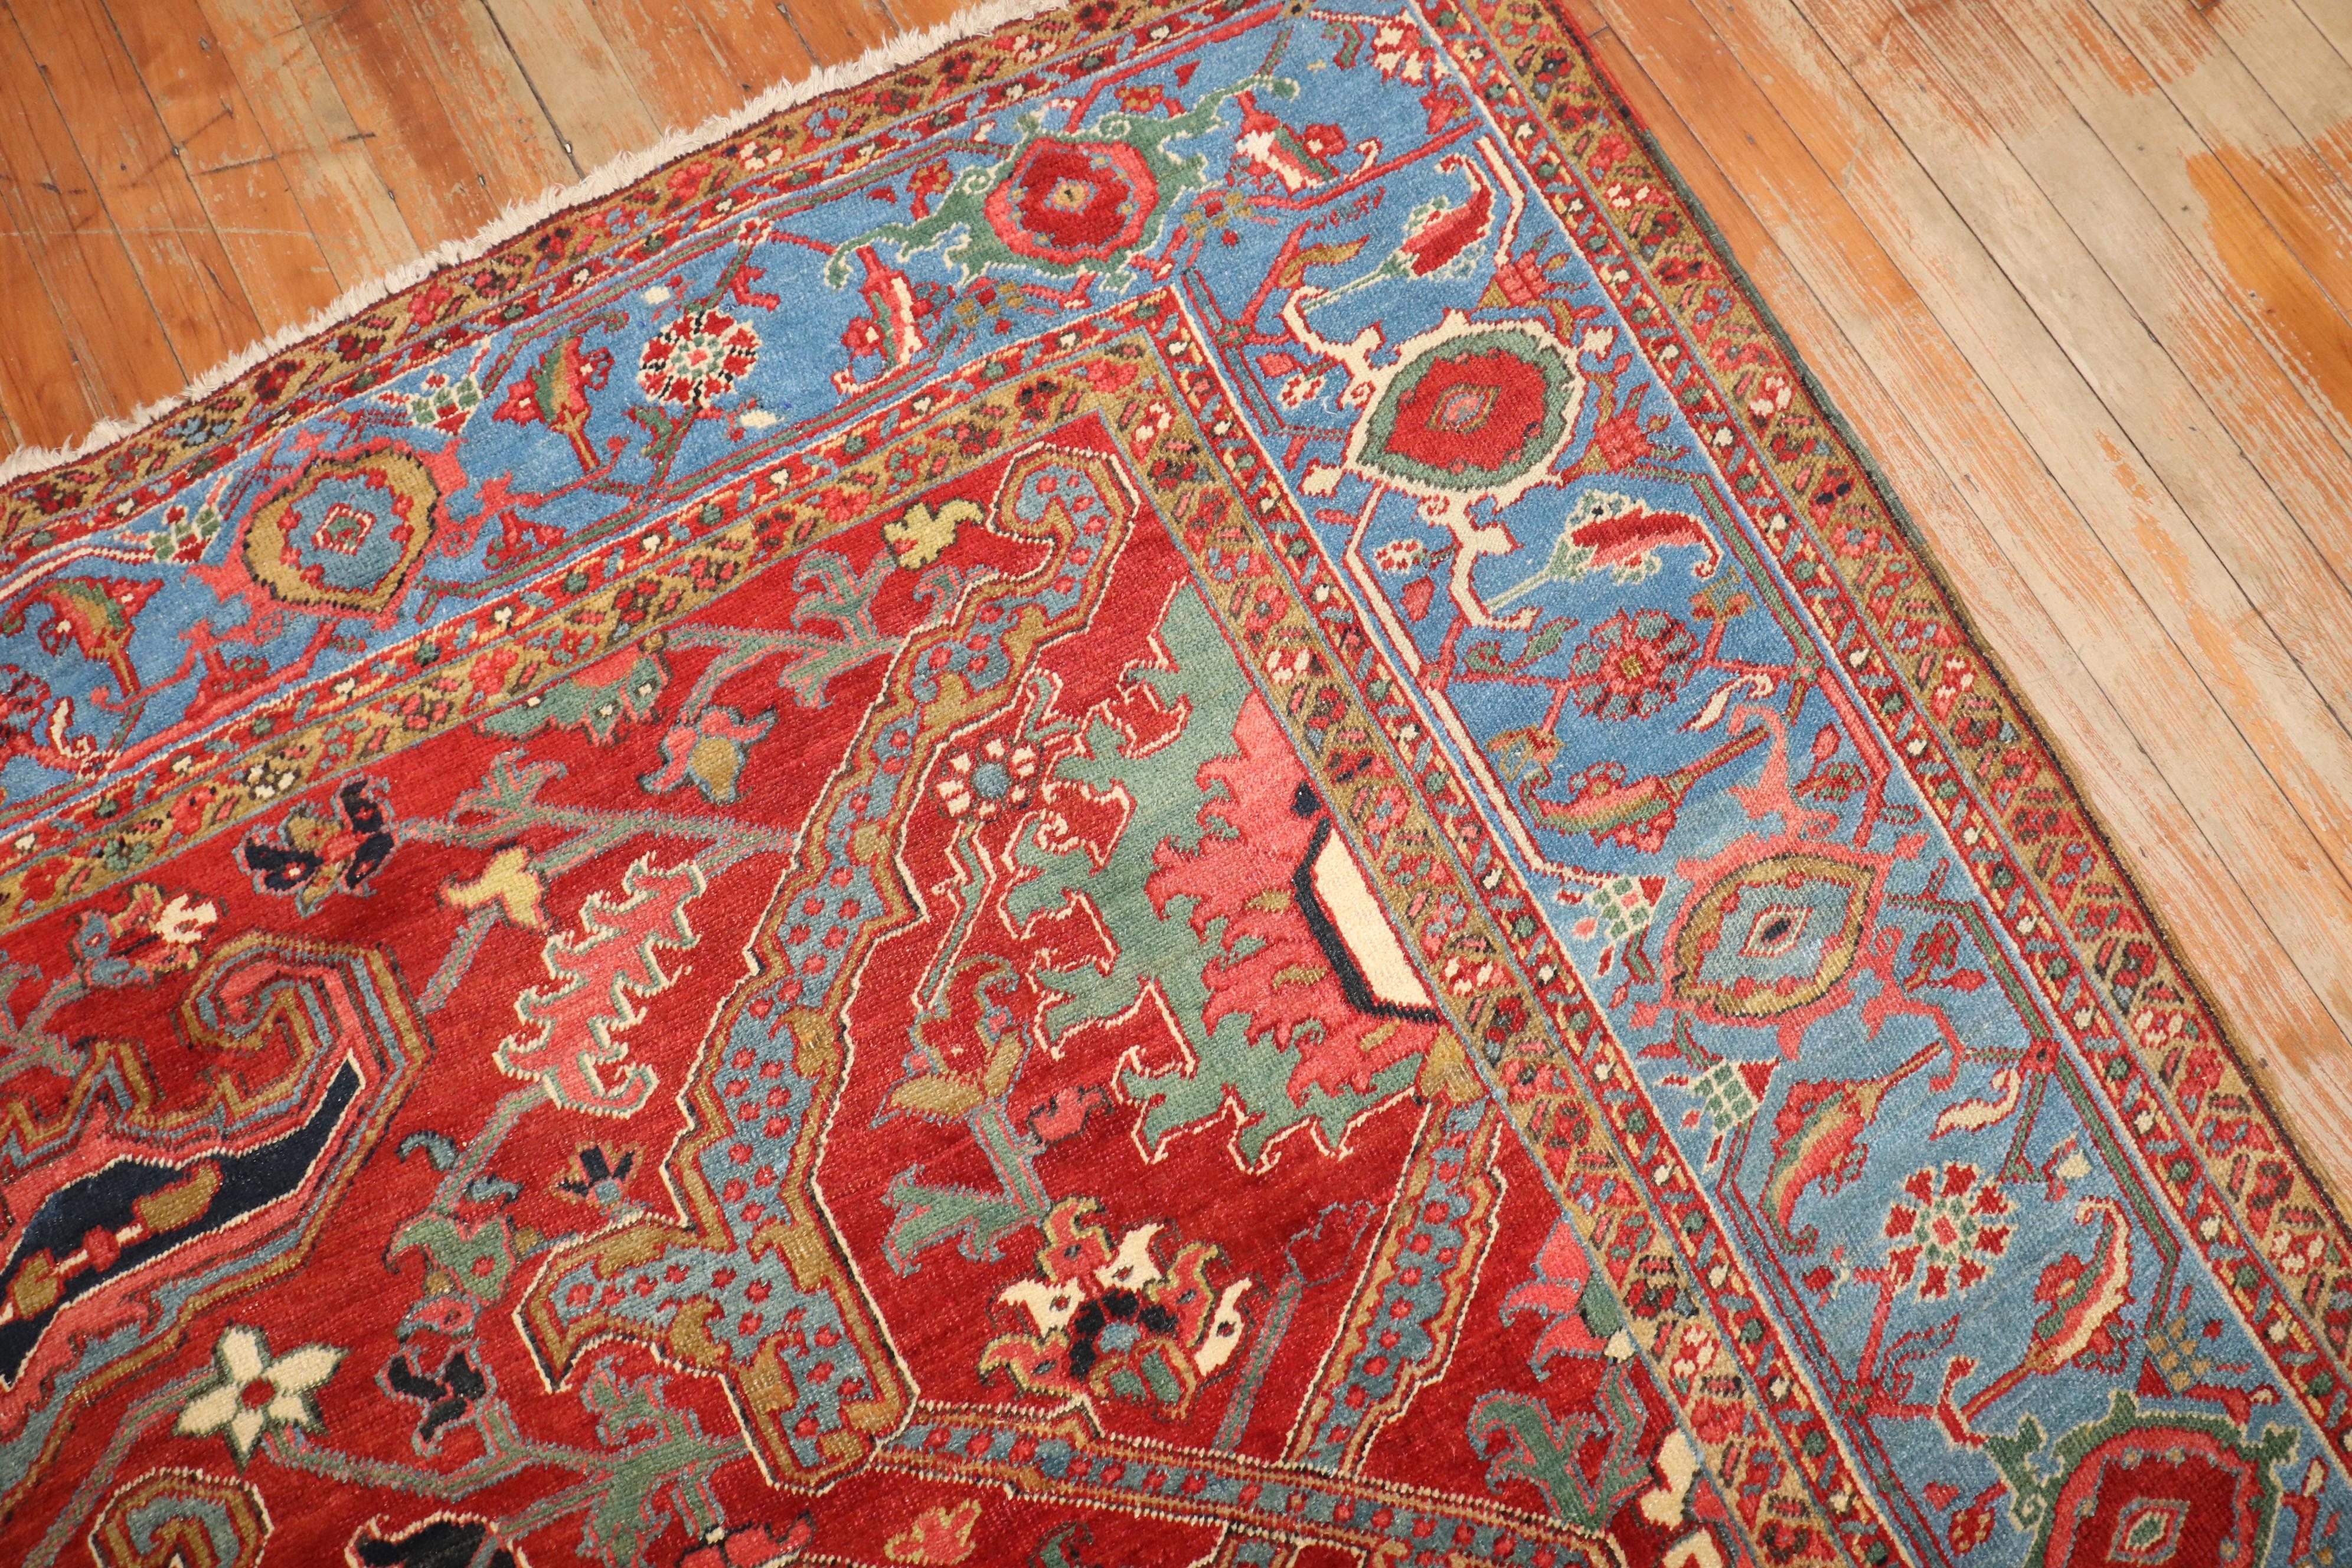 A stunning early 20th century Heriz Serapi rug with a large scale dragon style pattern on a rich red ground.

9' x 11'8''

Heriz rugs are Persian rugs from the area of Heris, East Azerbaijan in northwest Iran, northeast of Tabriz. Such rugs are